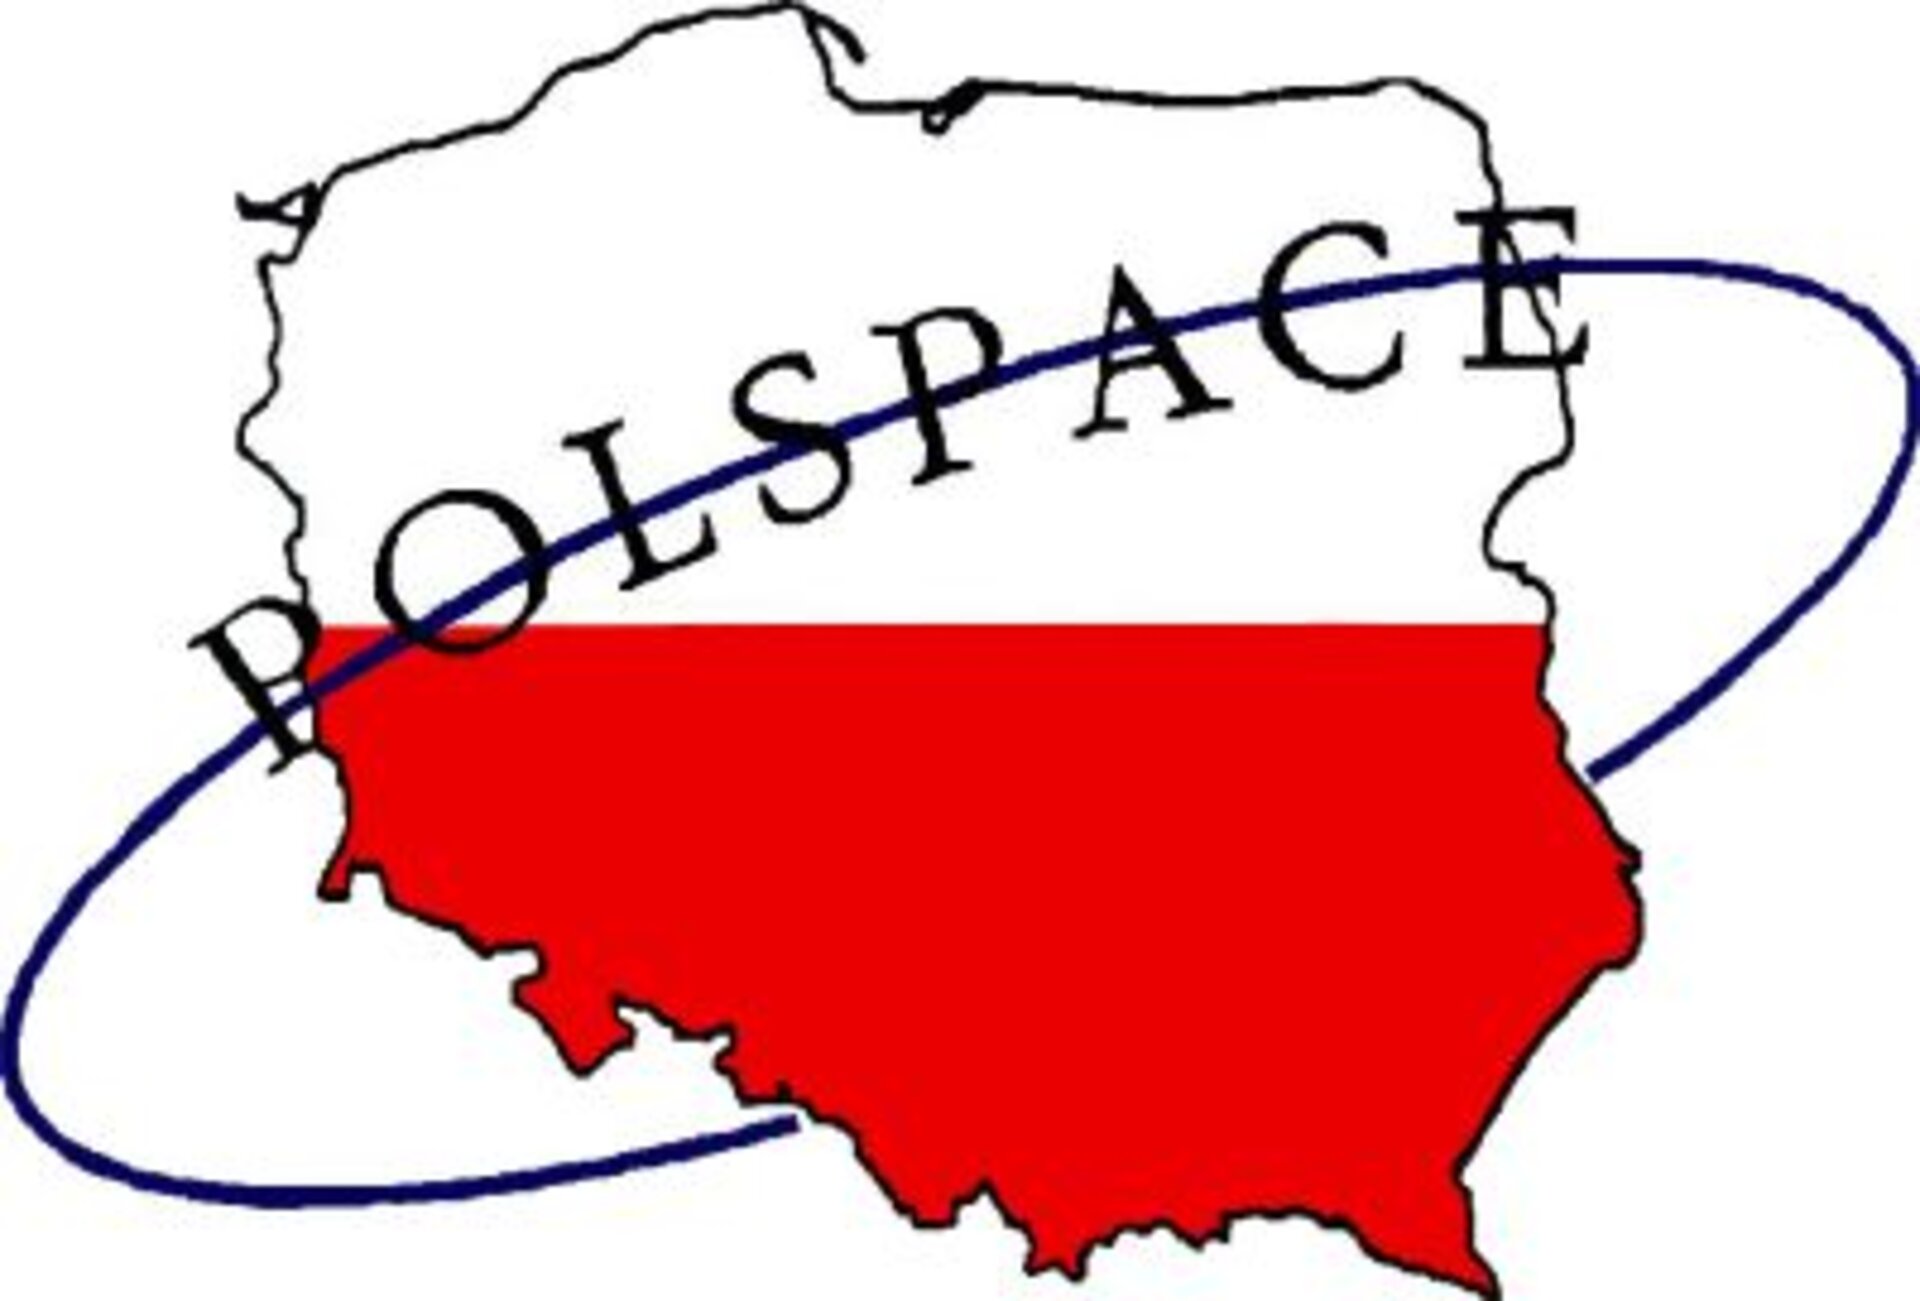 SURE on the road host in Poland - Polspace